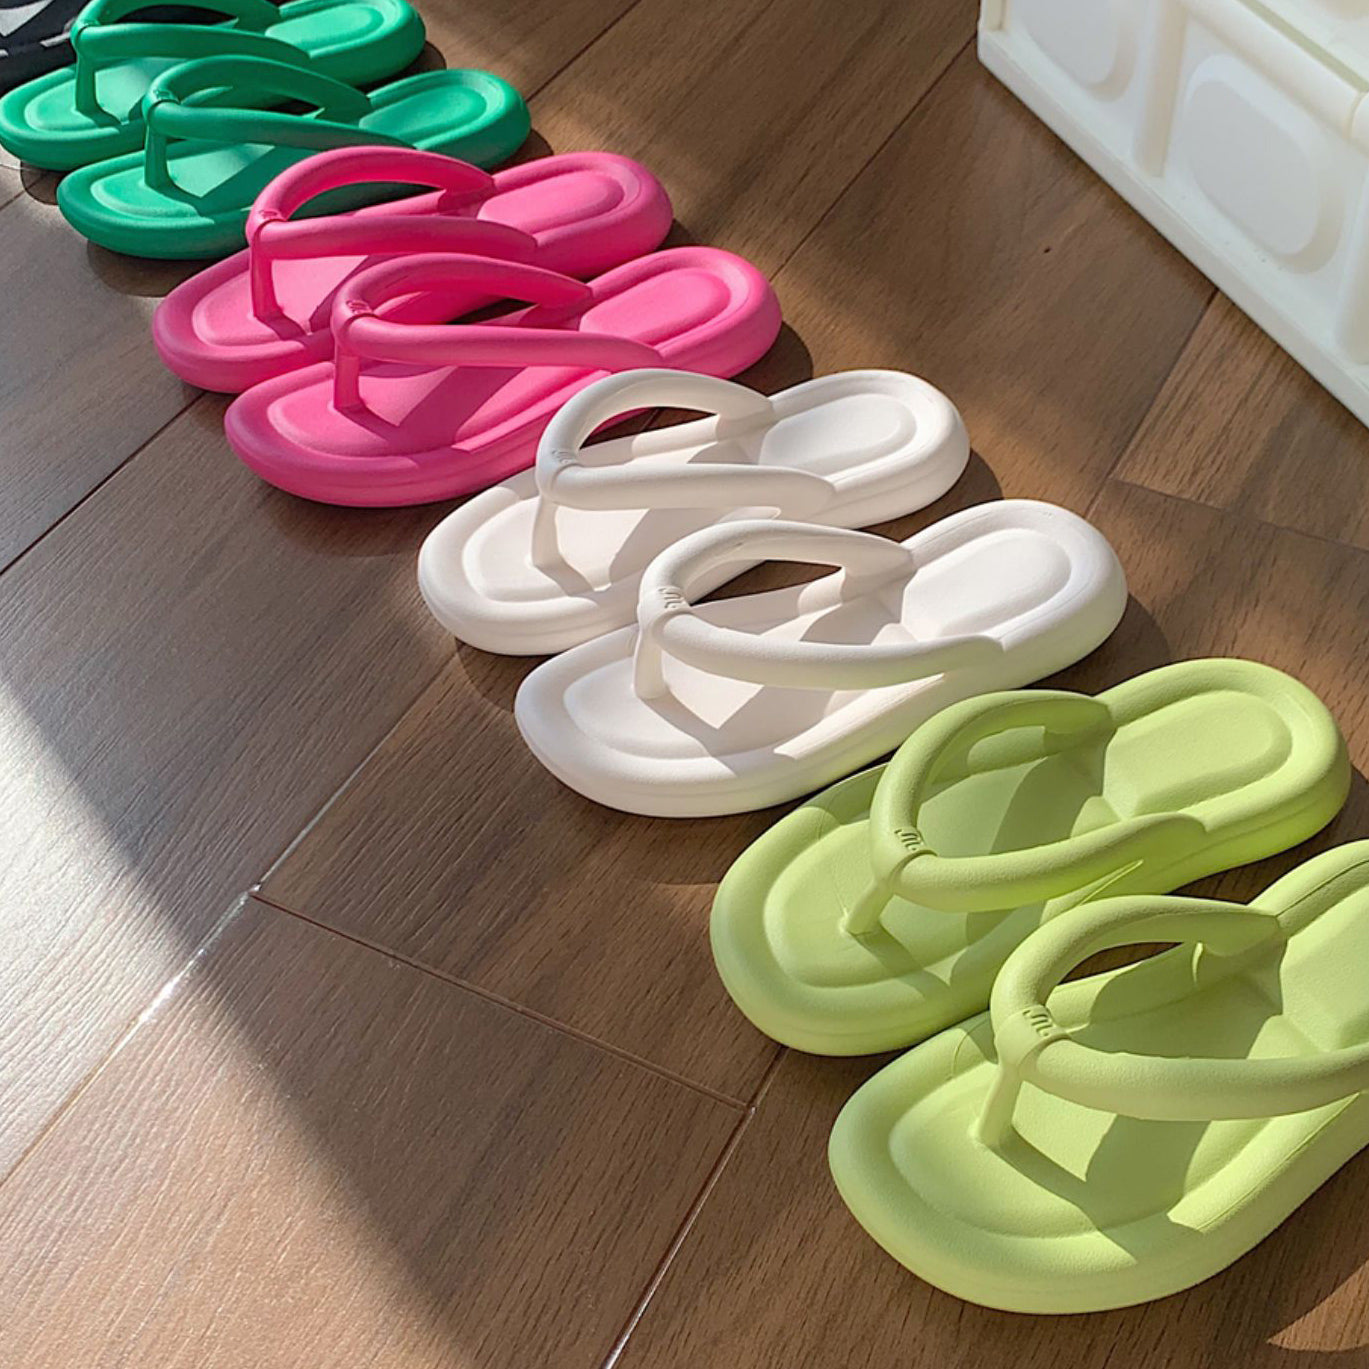 5color simple casual rubber roomshoes